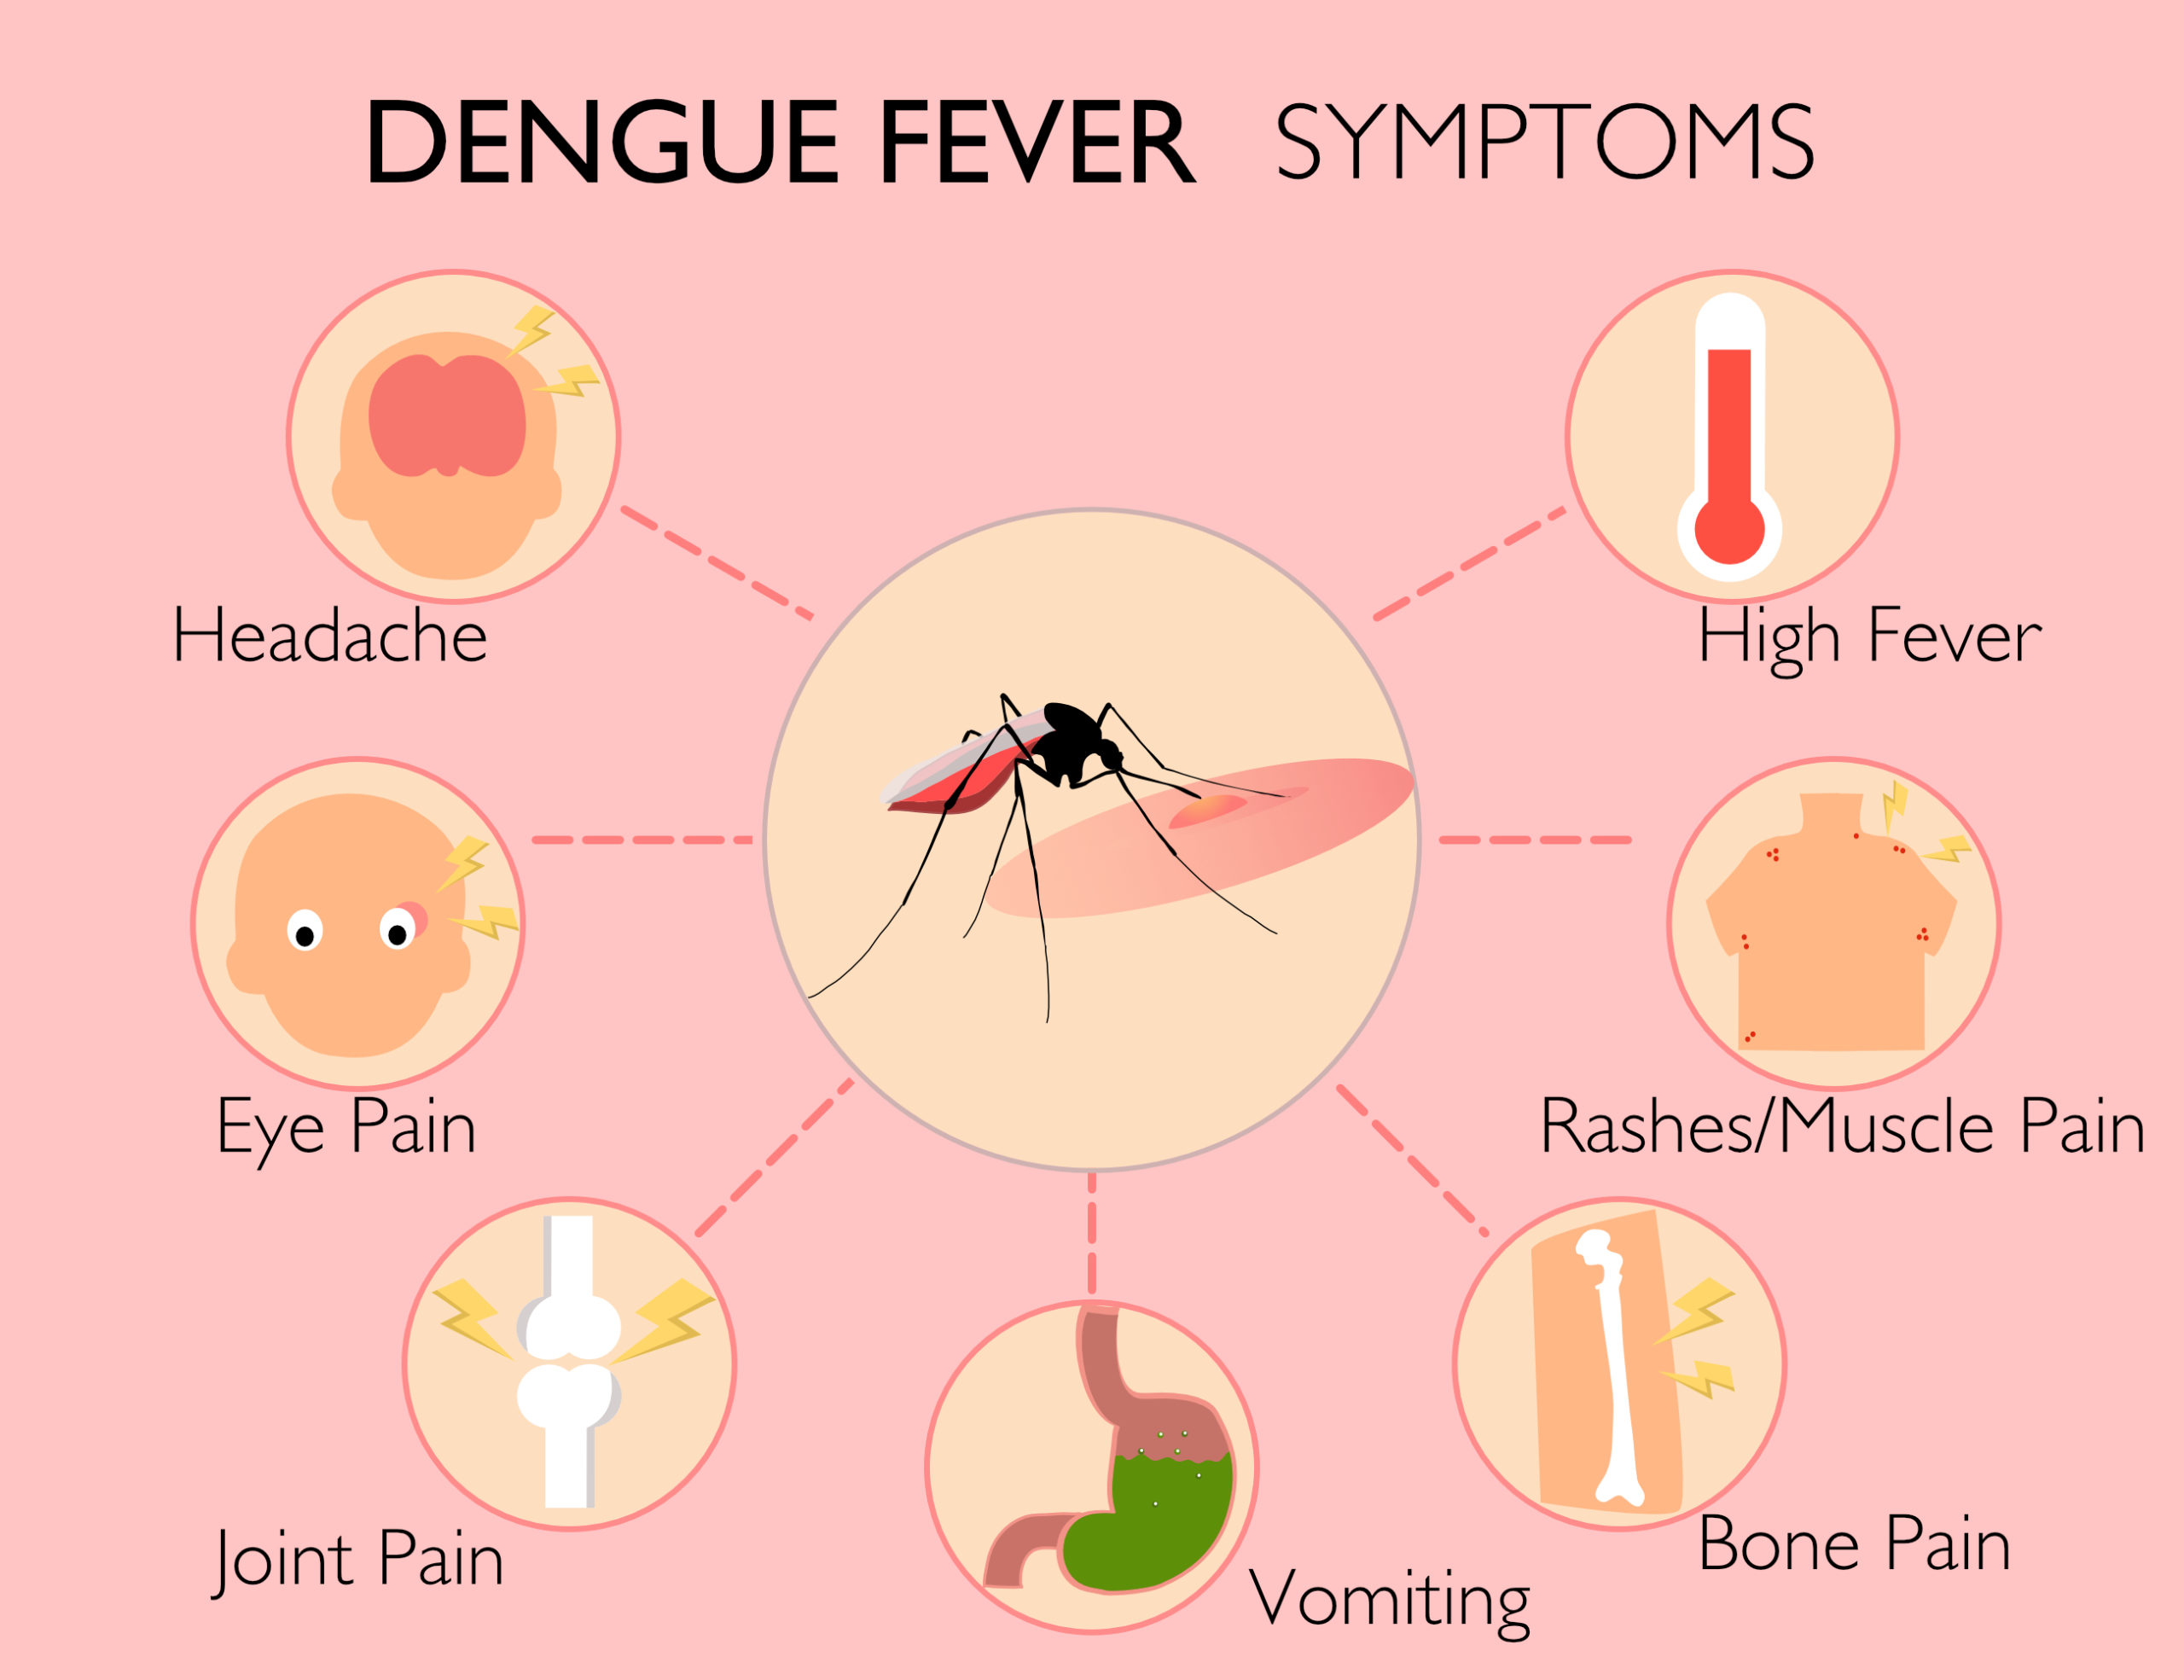 Dengue infection rate keeps jumping up